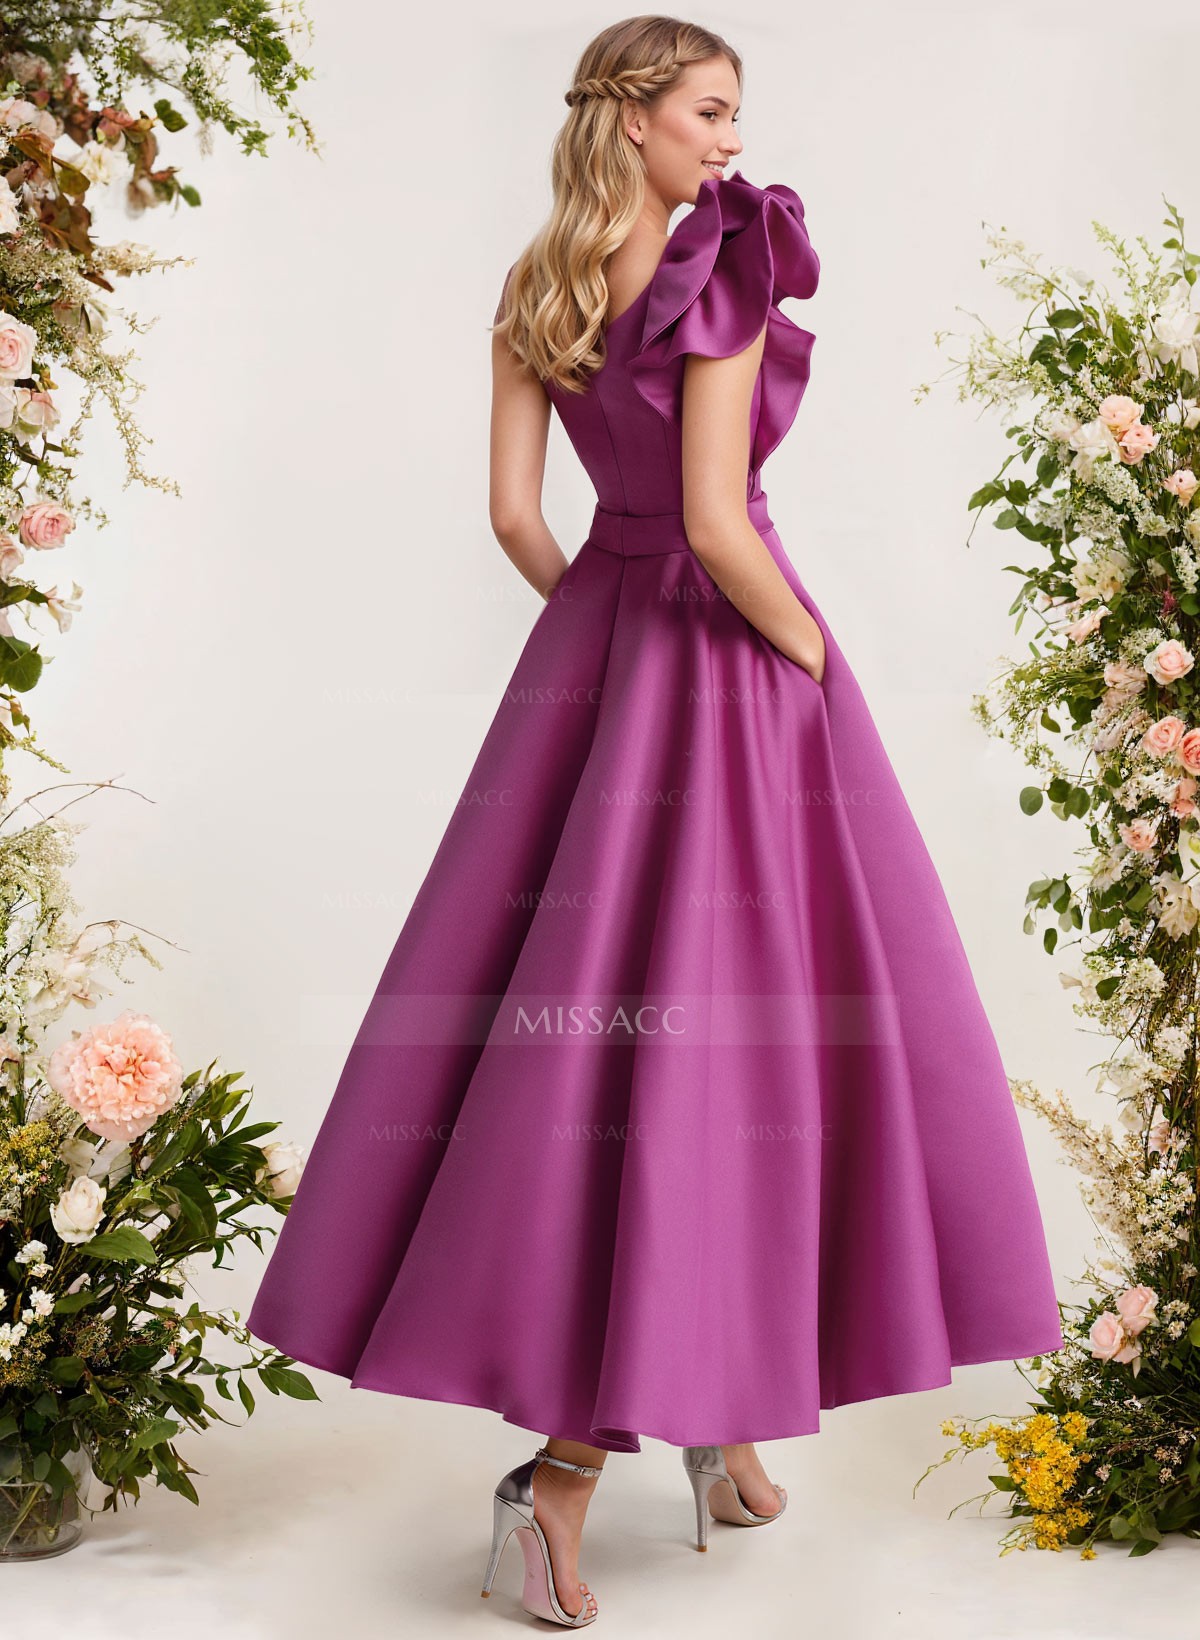 A-Line One-Shoulder Sleeveless Satin Bridesmaid Dresses With Ruffle